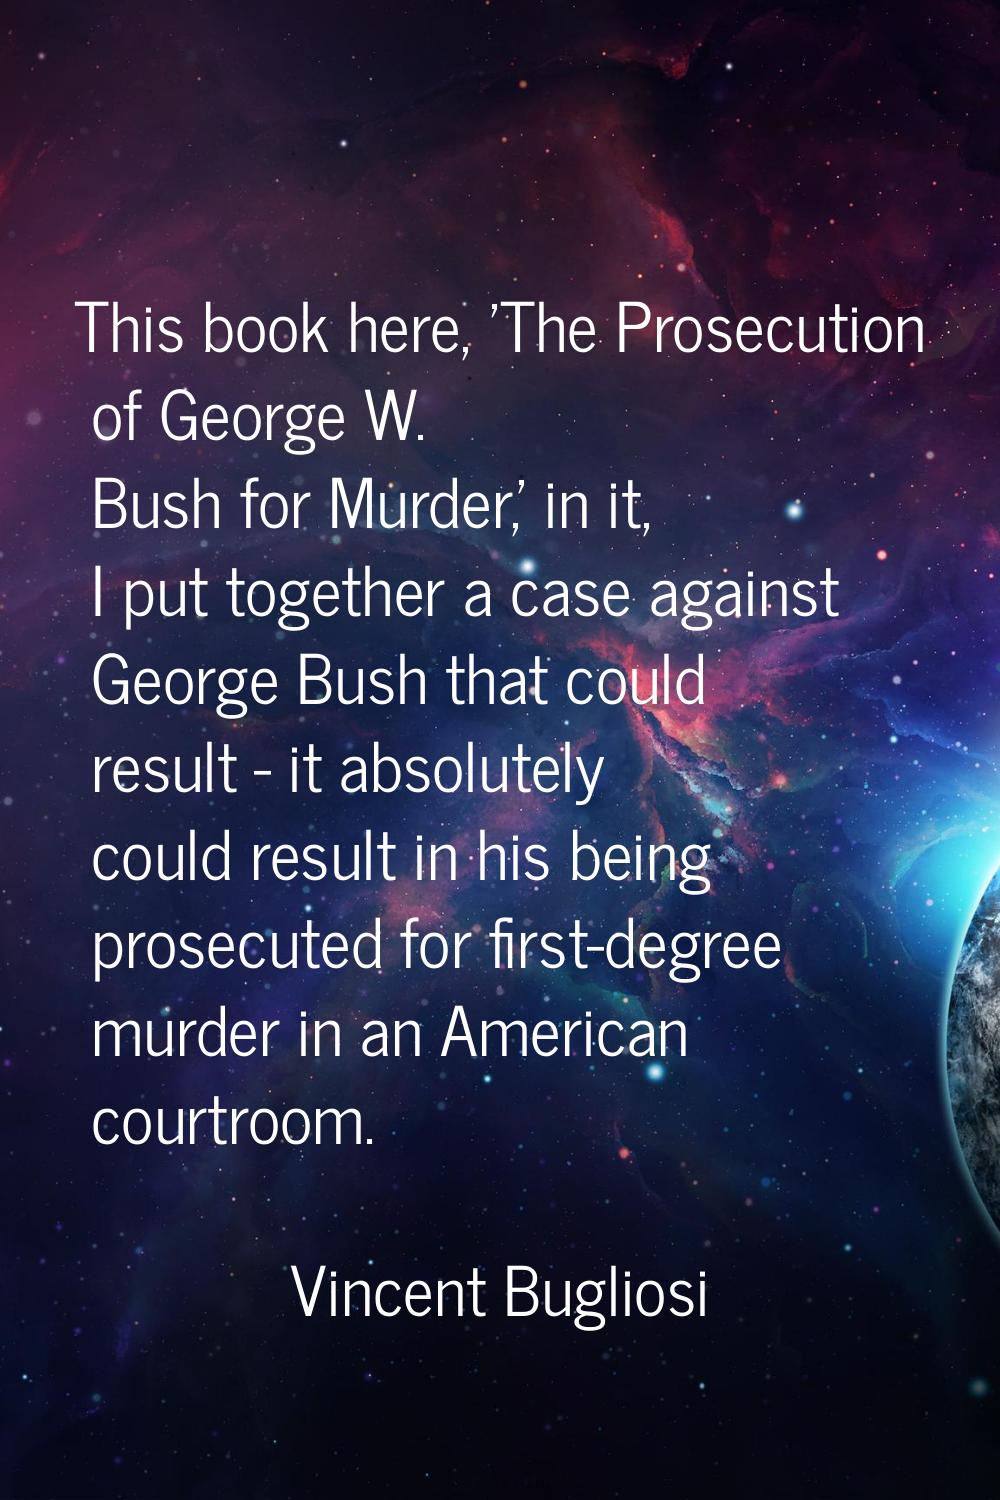 This book here, 'The Prosecution of George W. Bush for Murder,' in it, I put together a case agains